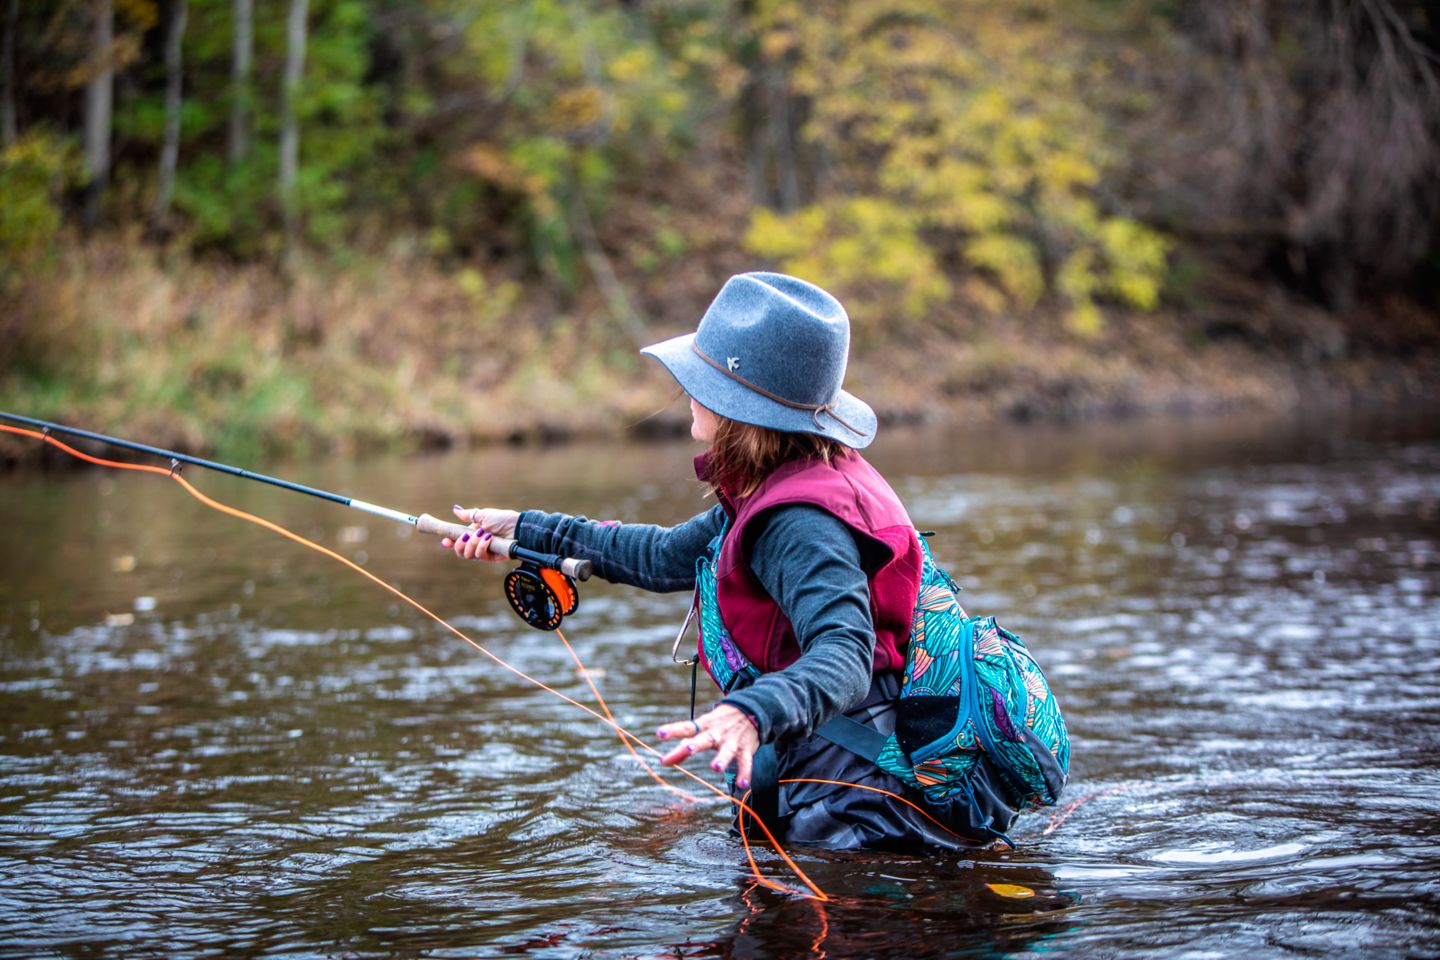 A woman in a hat fly fishing in the Sheboygan River in summertime